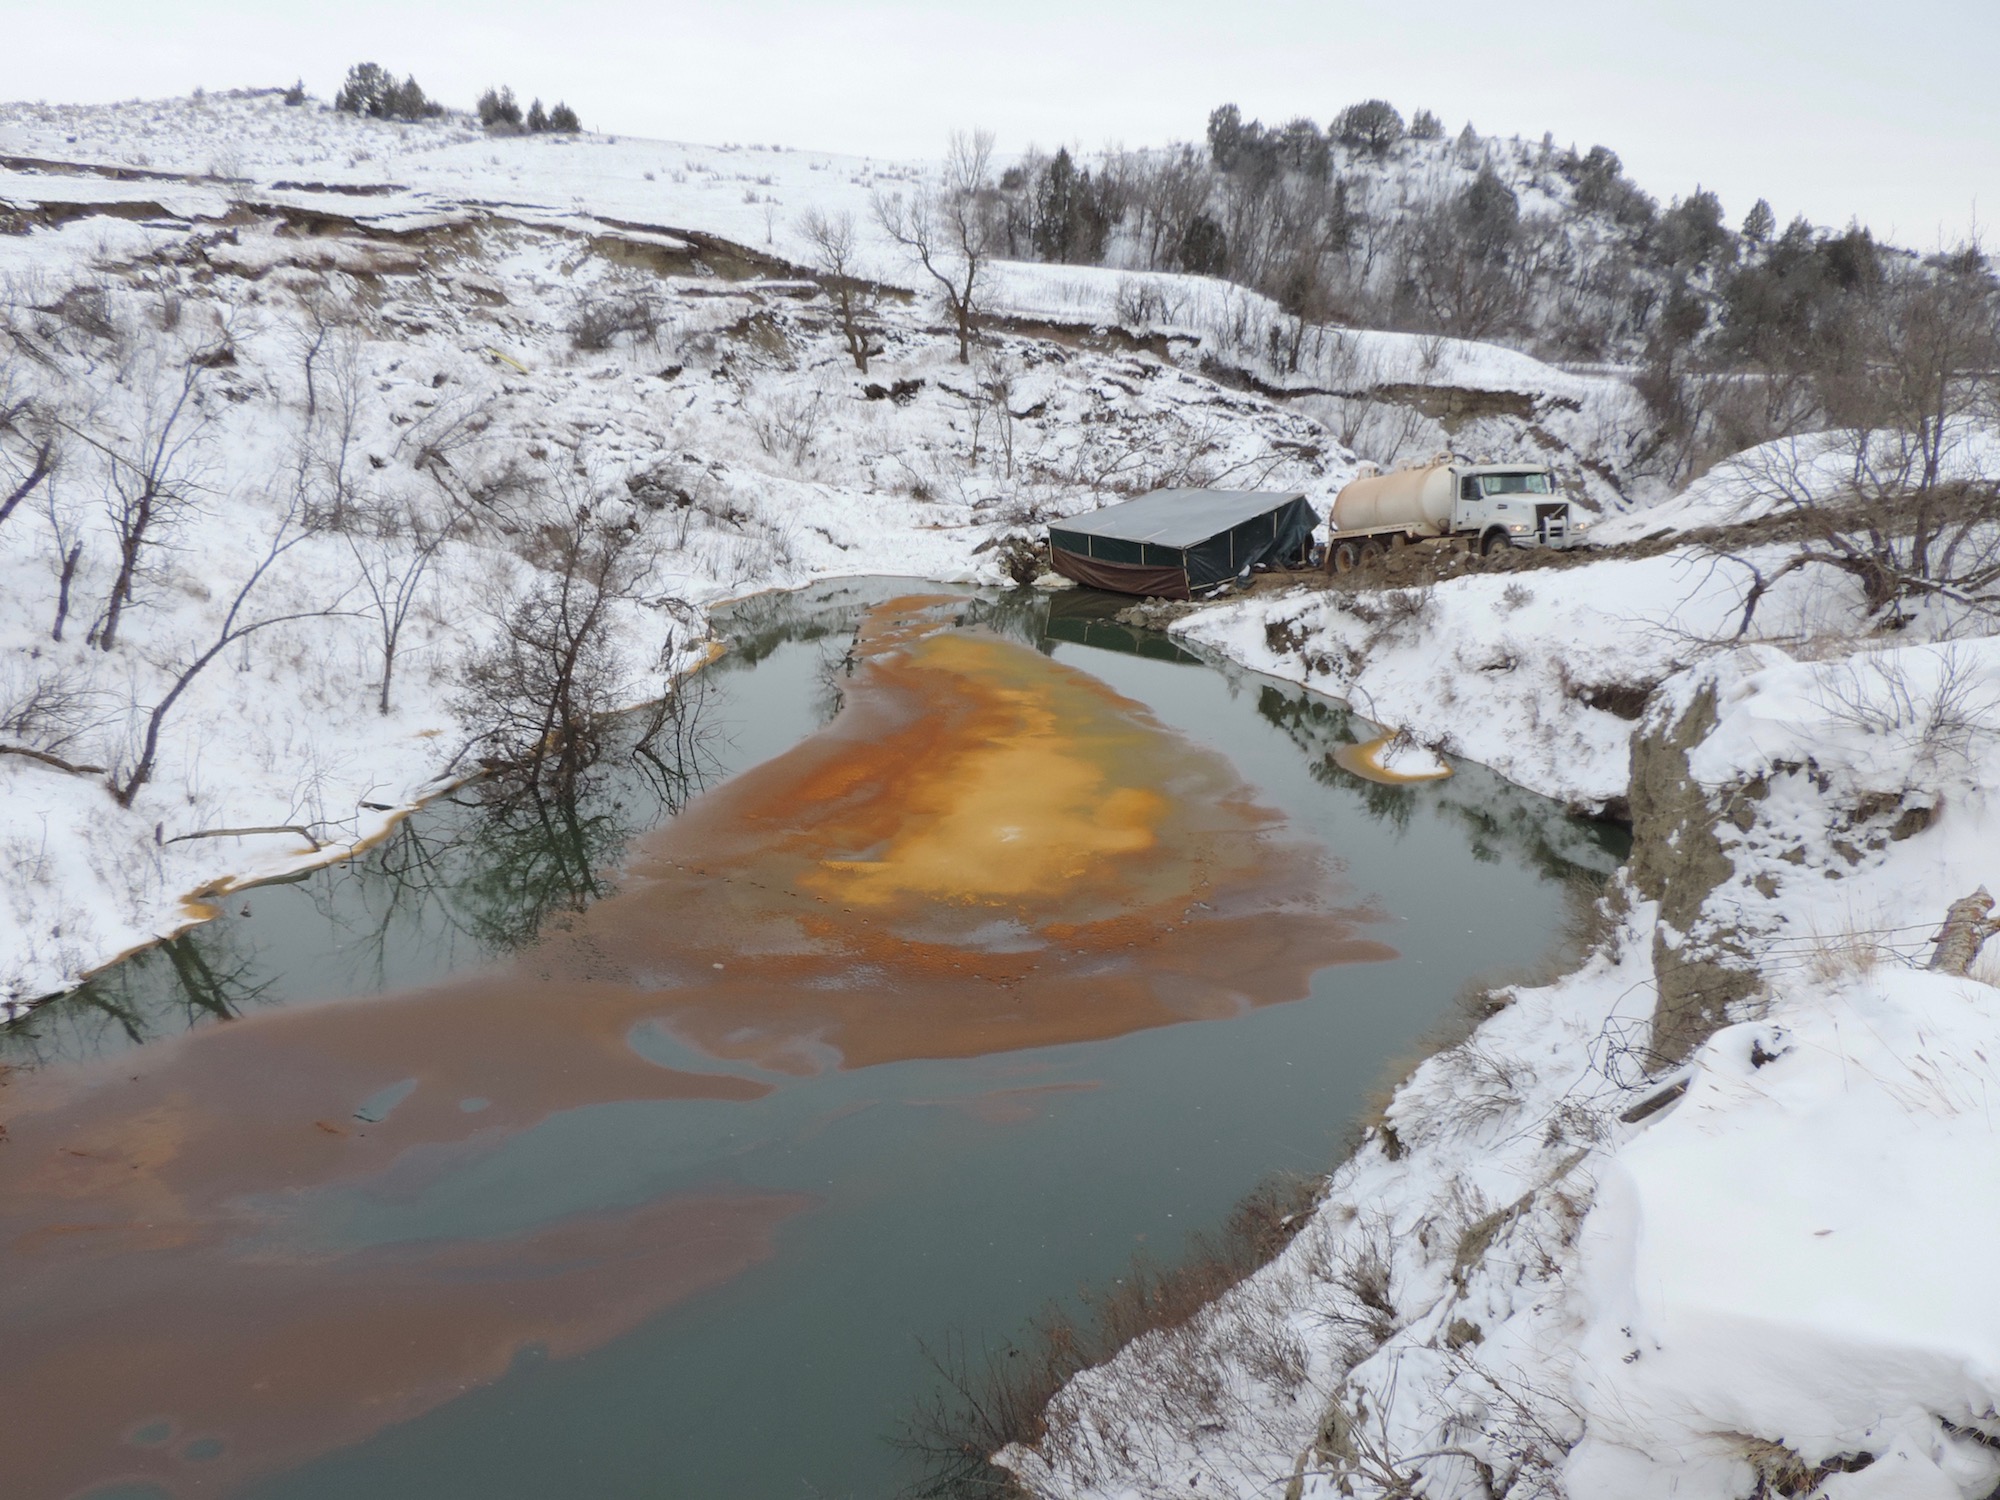 Pipeline continues to leak oil months after rupture in North Dakota